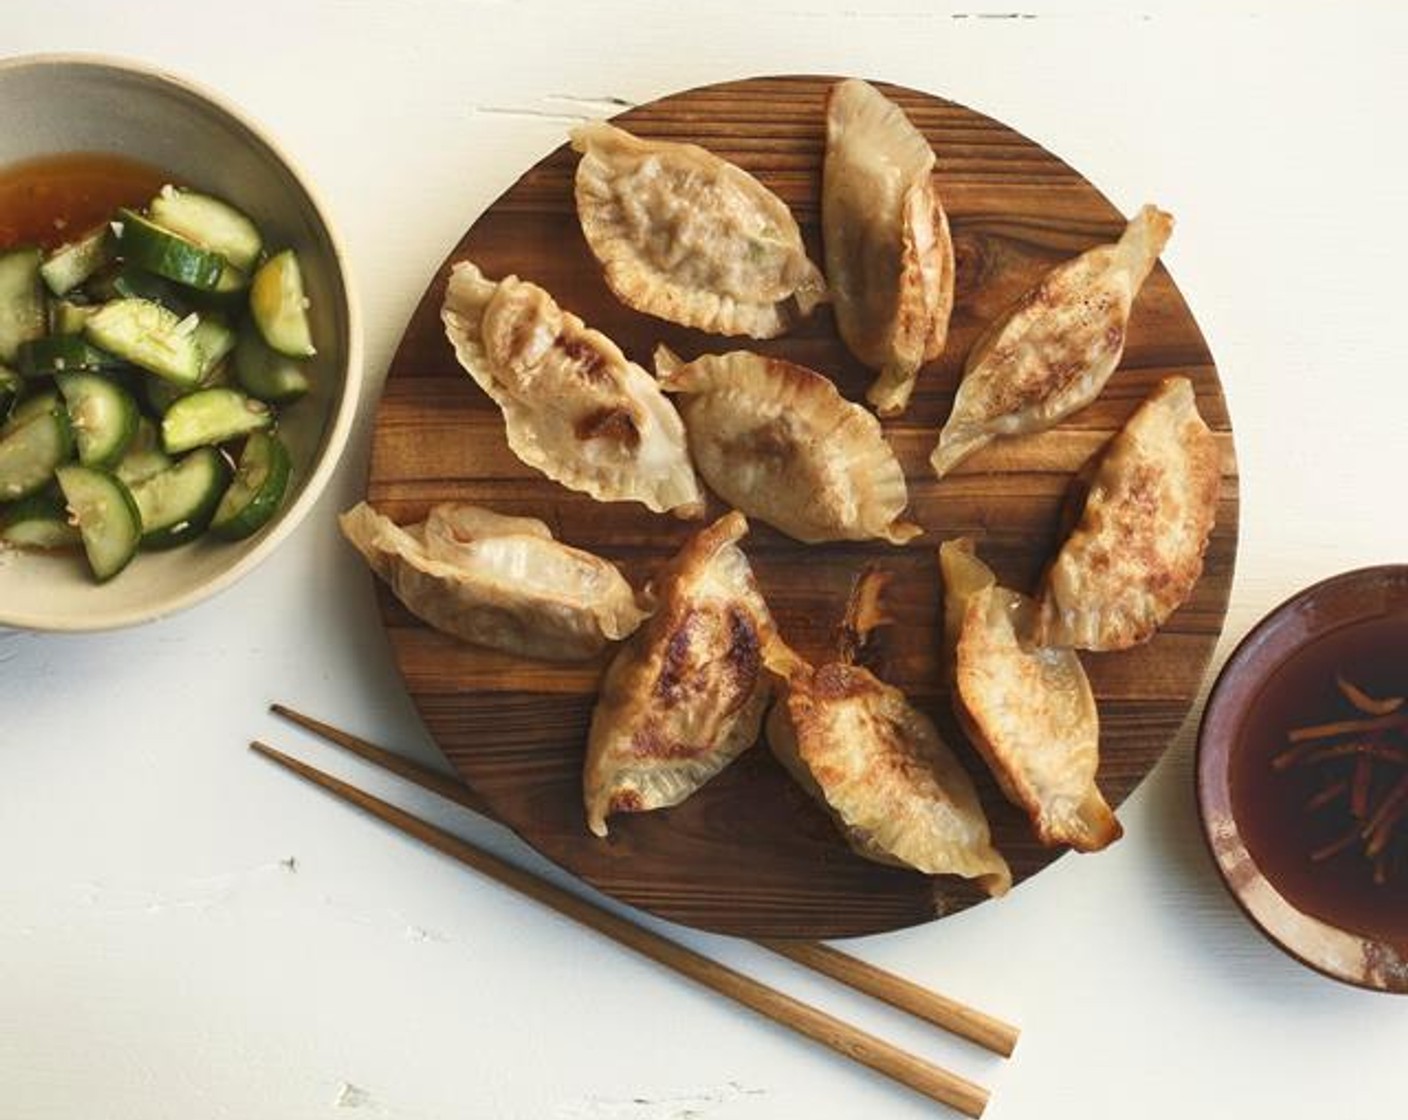 Gingery Pot Stickers with Cooling Cucumber Salad